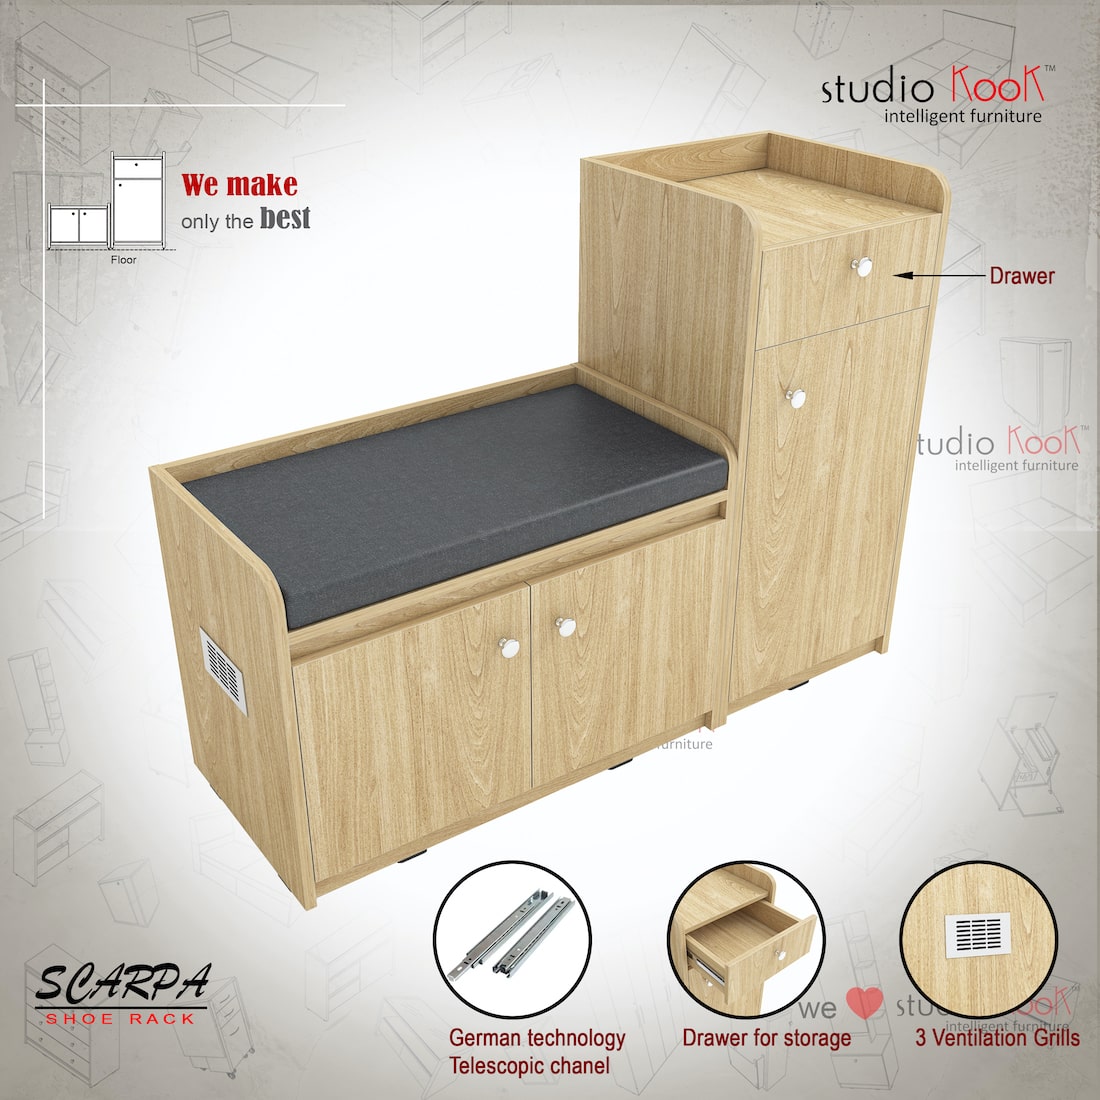 Scarpa Shoerack || Shoe Cabinet with Cushion Seating and 12 pairs capacity